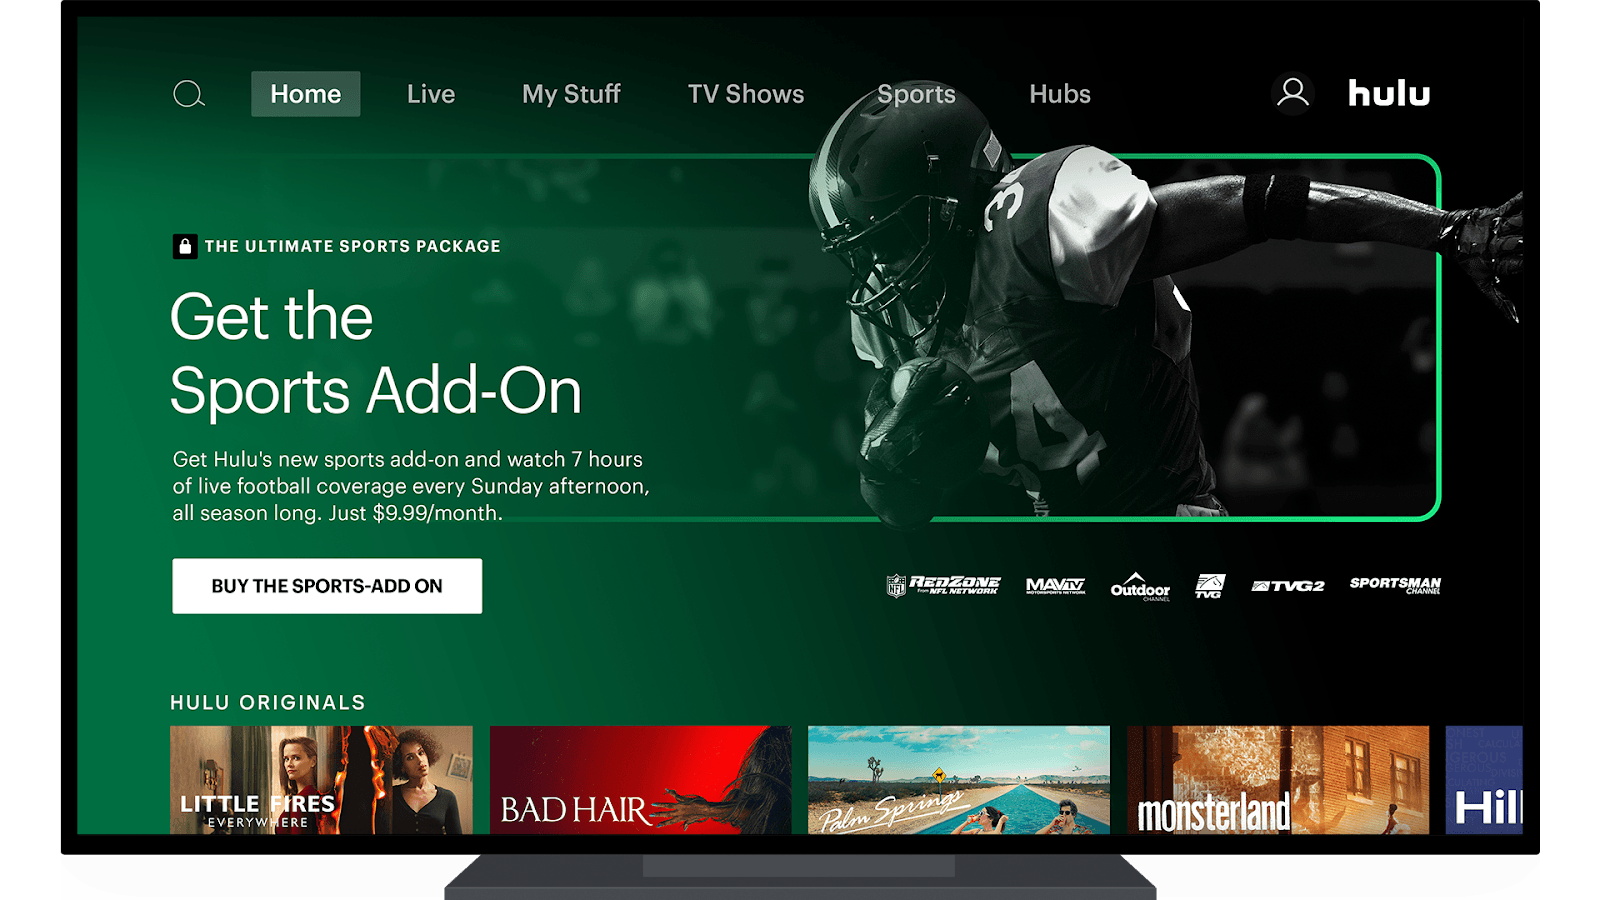 Hulu Adds NFL Network, Launches a Sports Add-On Package with NFL RedZone